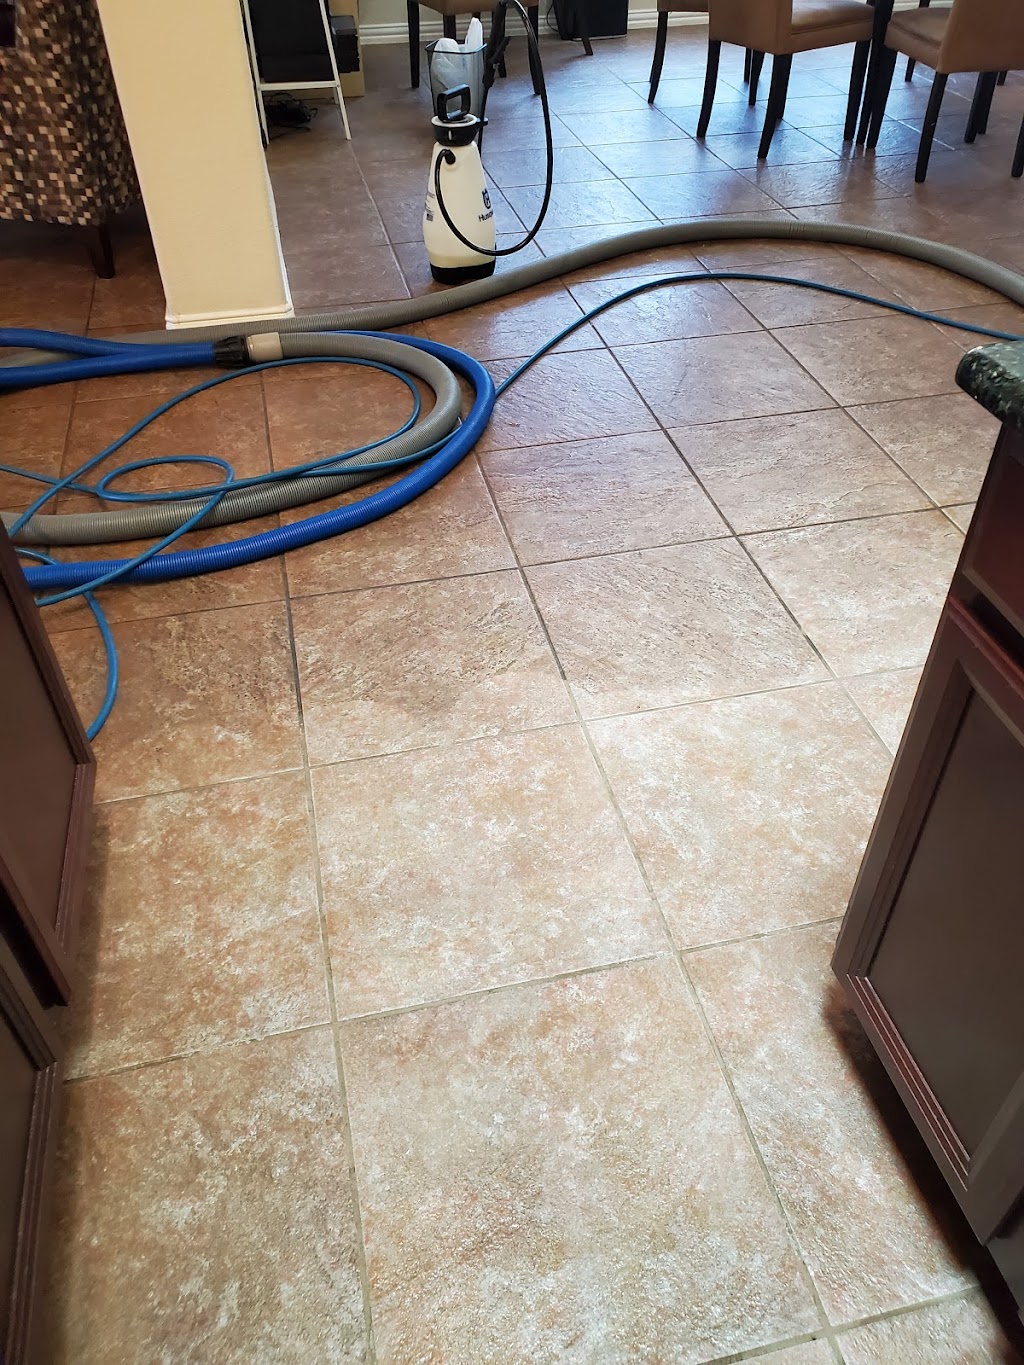 Above The rest carpet cleaning. 20+ years experience. | Hurst, TX 76053, USA | Phone: (682) 258-3642